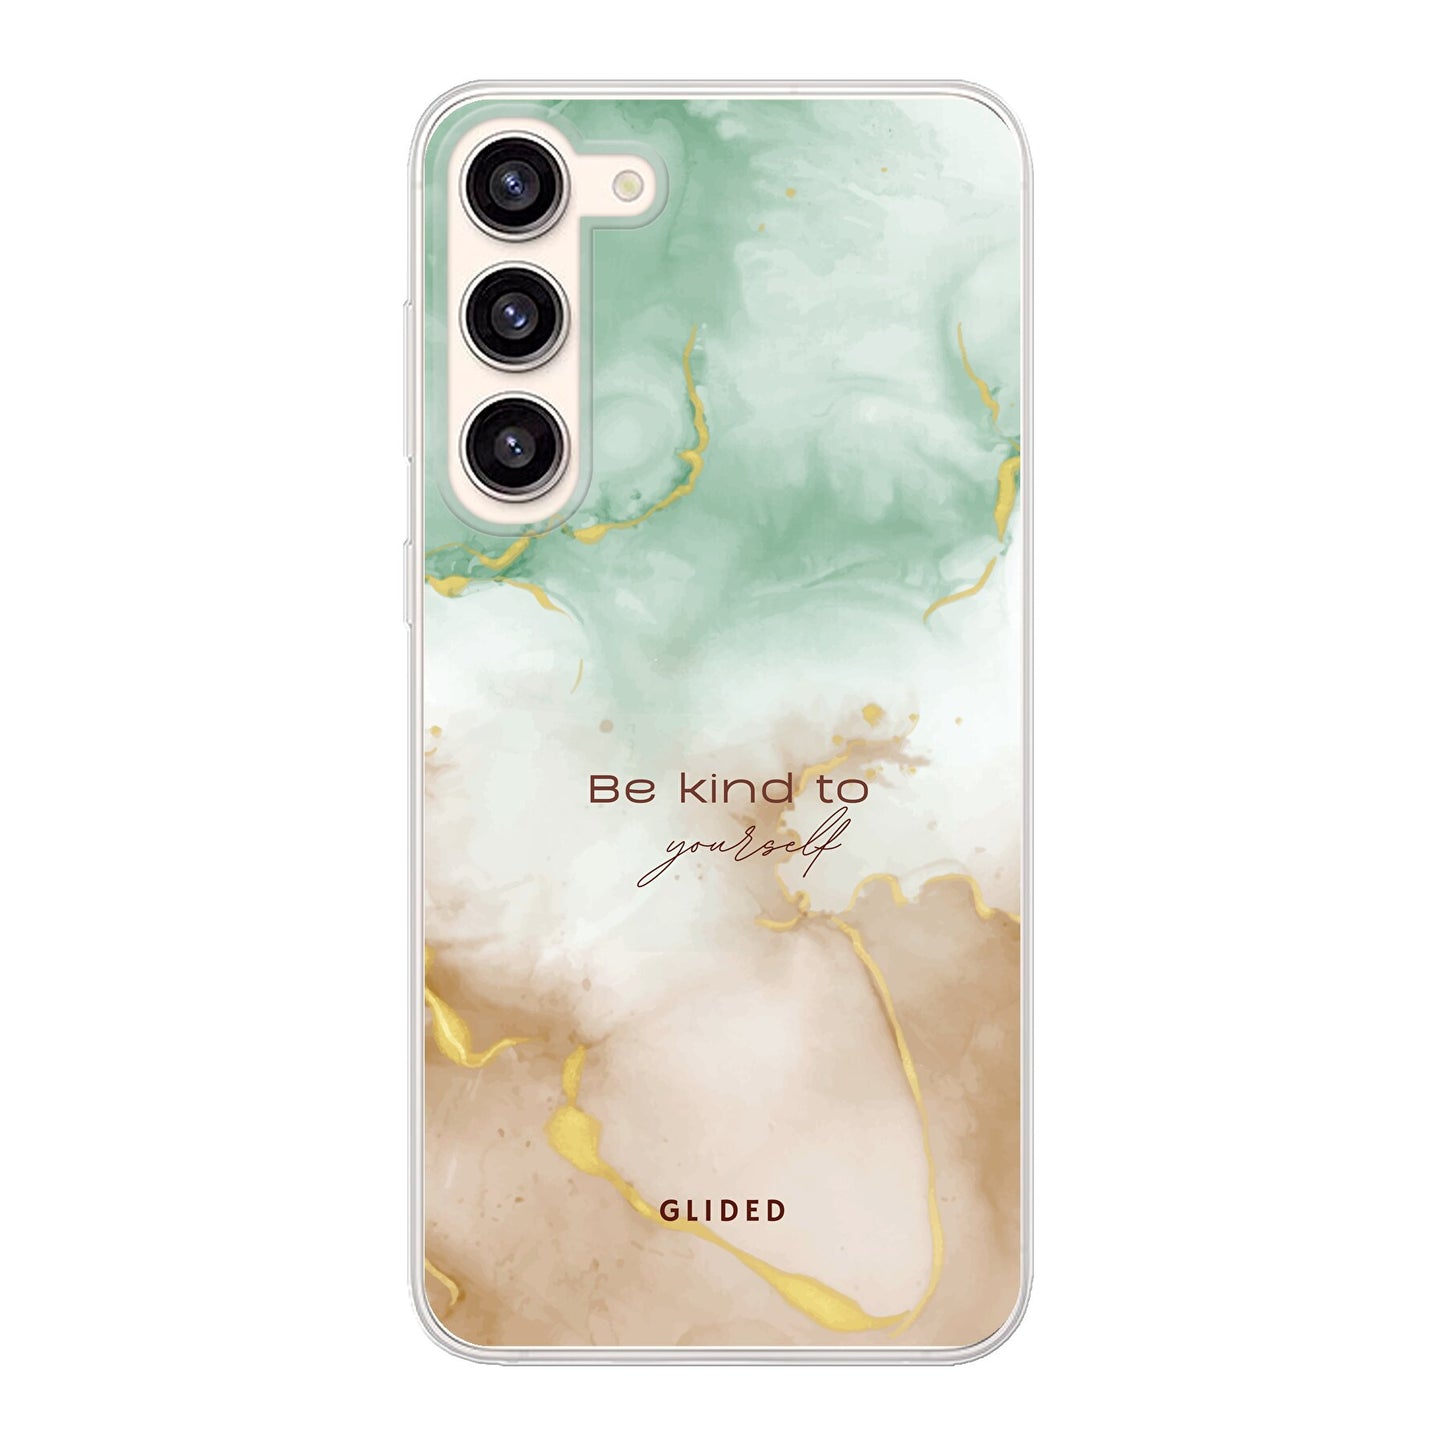 Kind to yourself - Samsung Galaxy S23 Plus Handyhülle Soft case